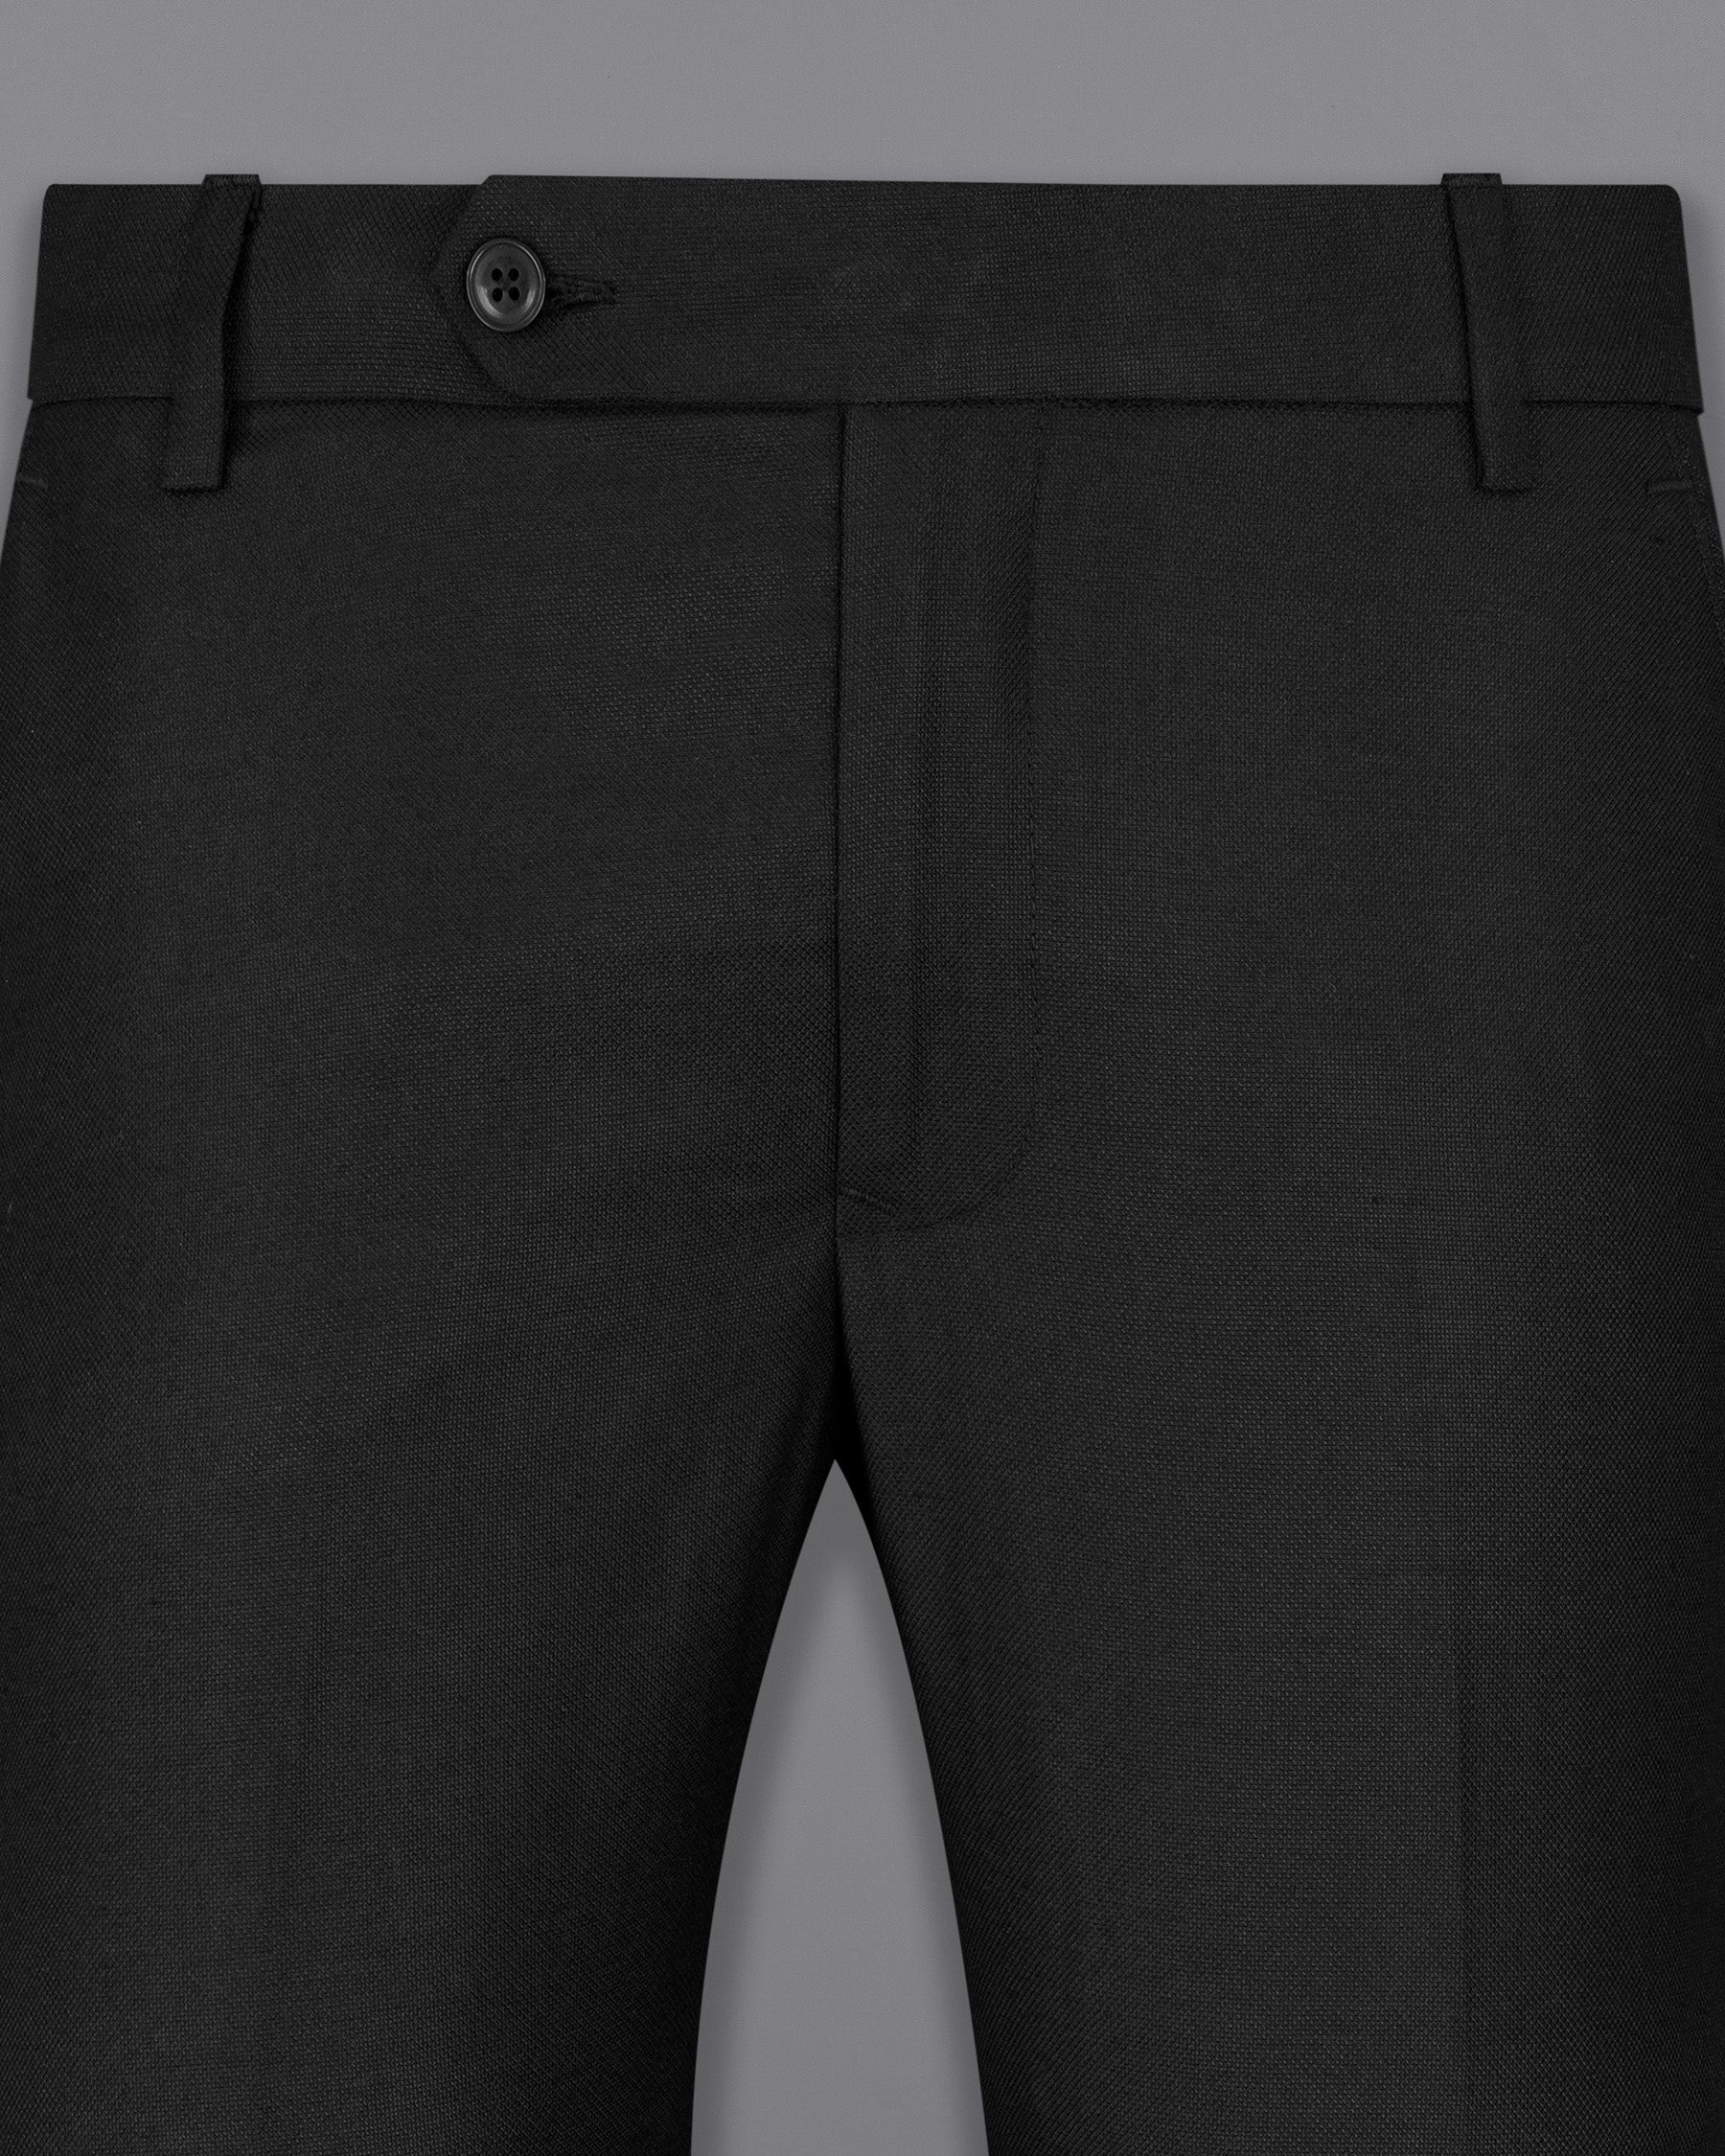 Trousers Mara Hoffman Blue size 8 US in Cotton - 38623297